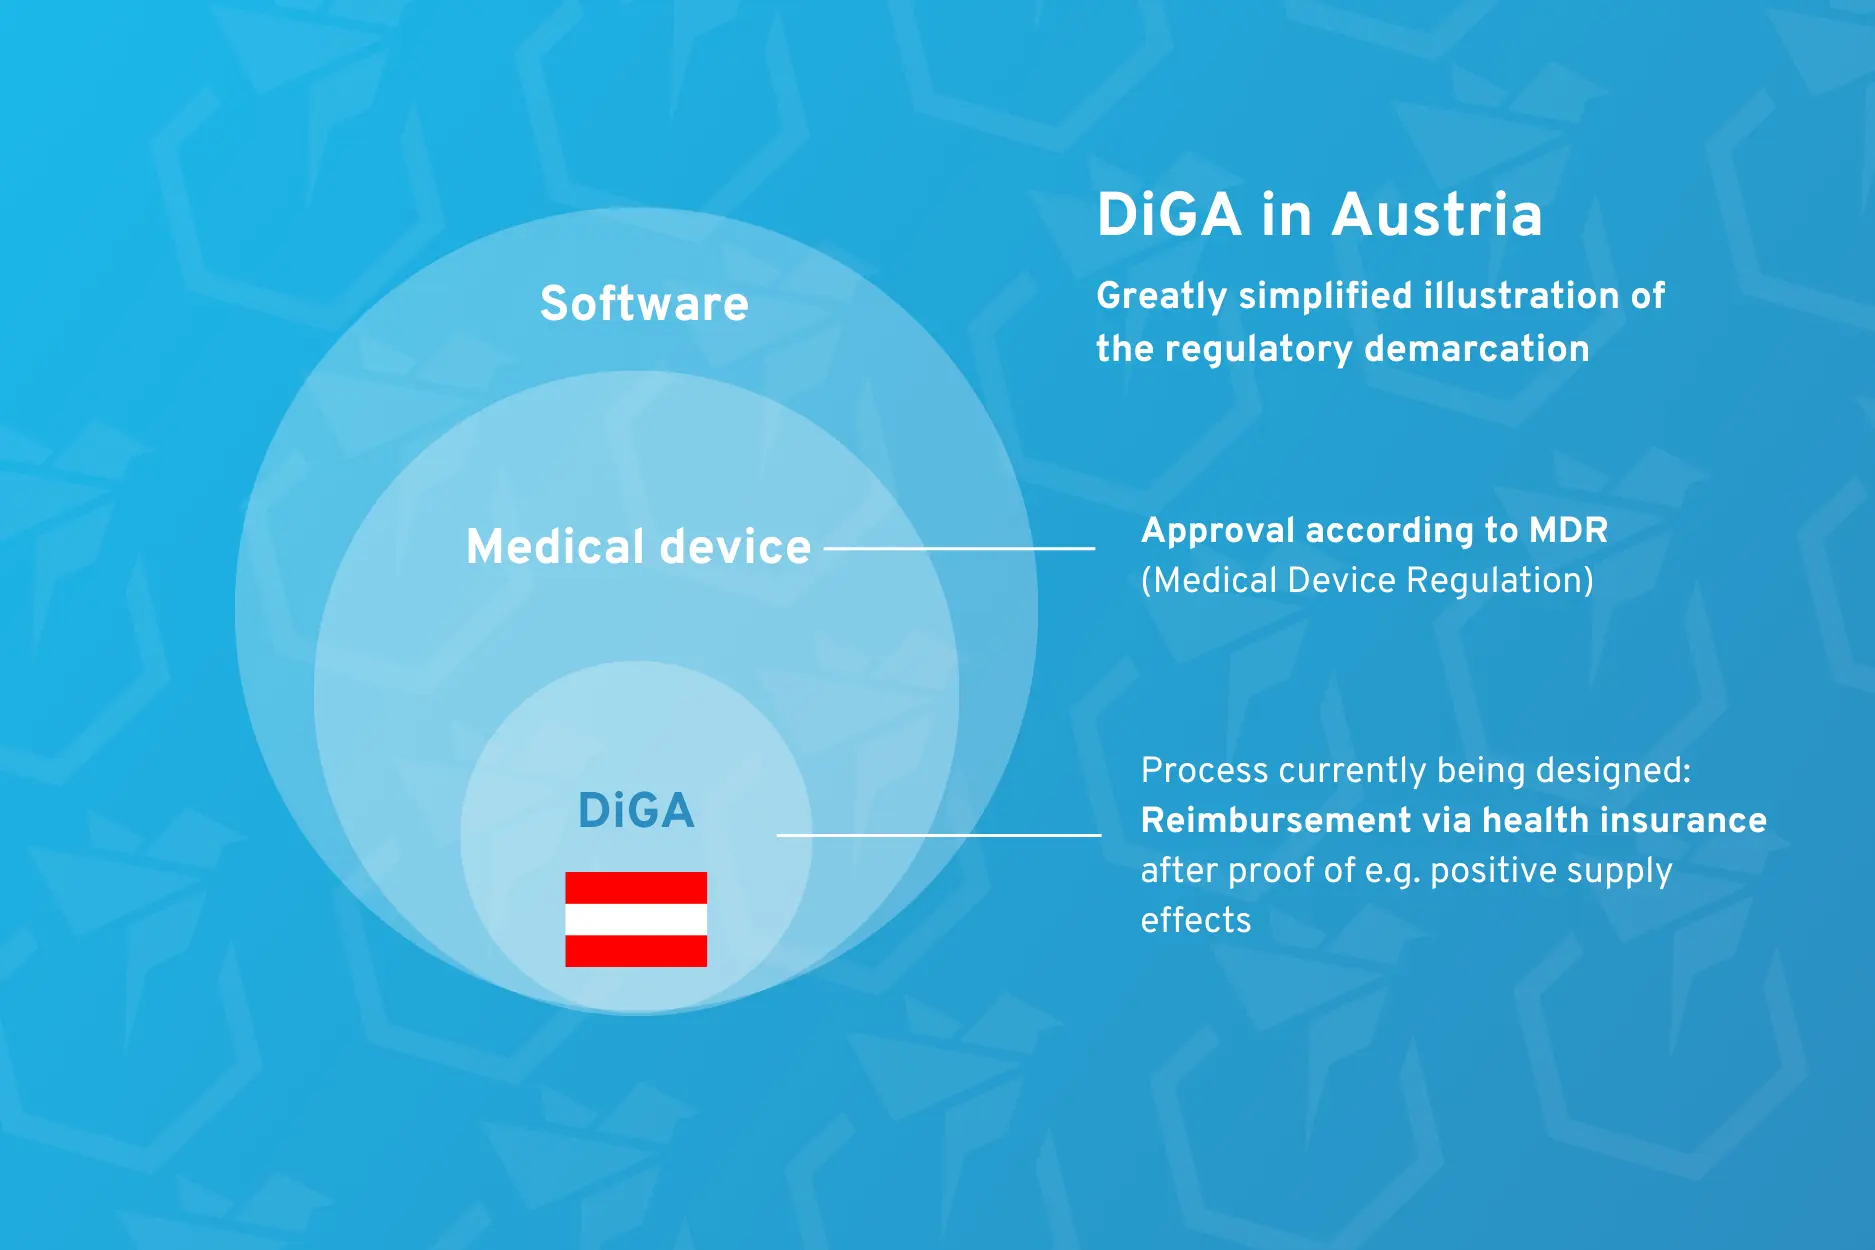 A highly simplified illustration of the regulatory boundaries of DiGA in Austria.